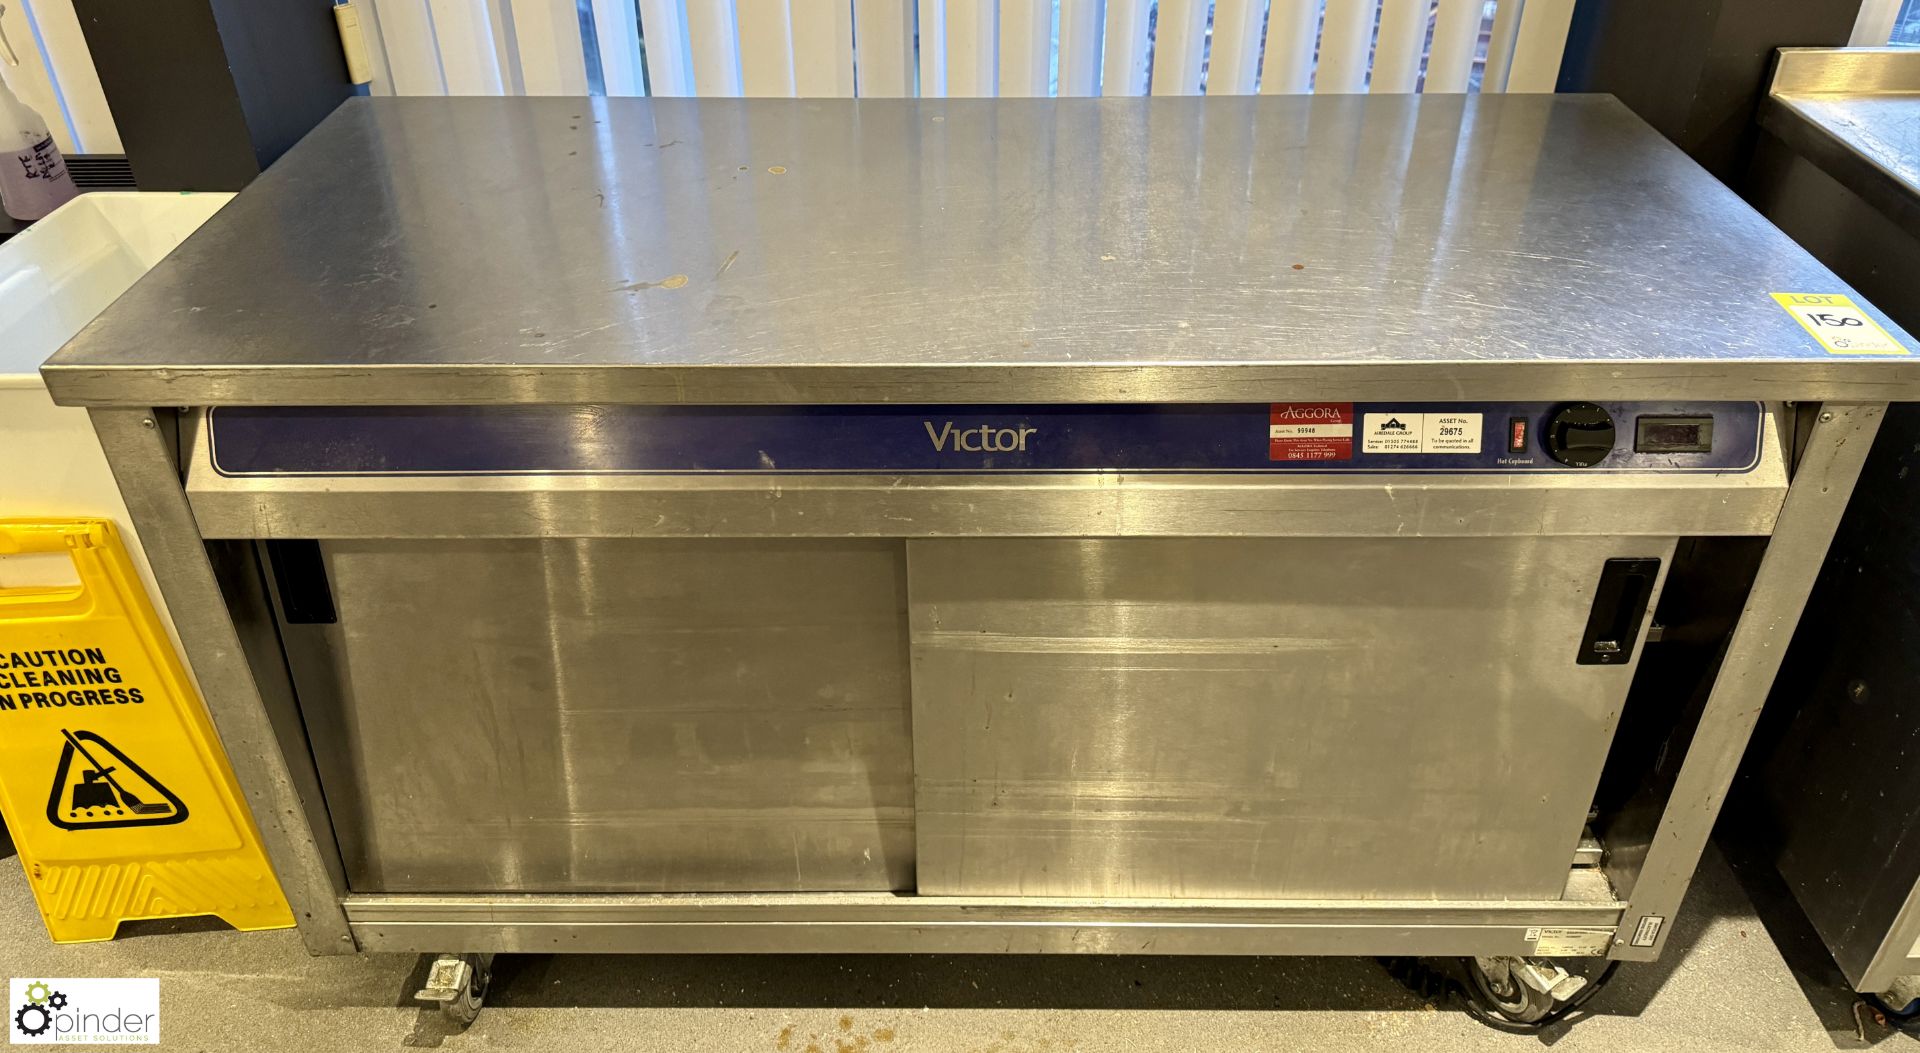 Victor stainless steel mobile twin door Heated Cabinet, 240volts, 1530mm x 670mm x 900mm (location - Image 2 of 5